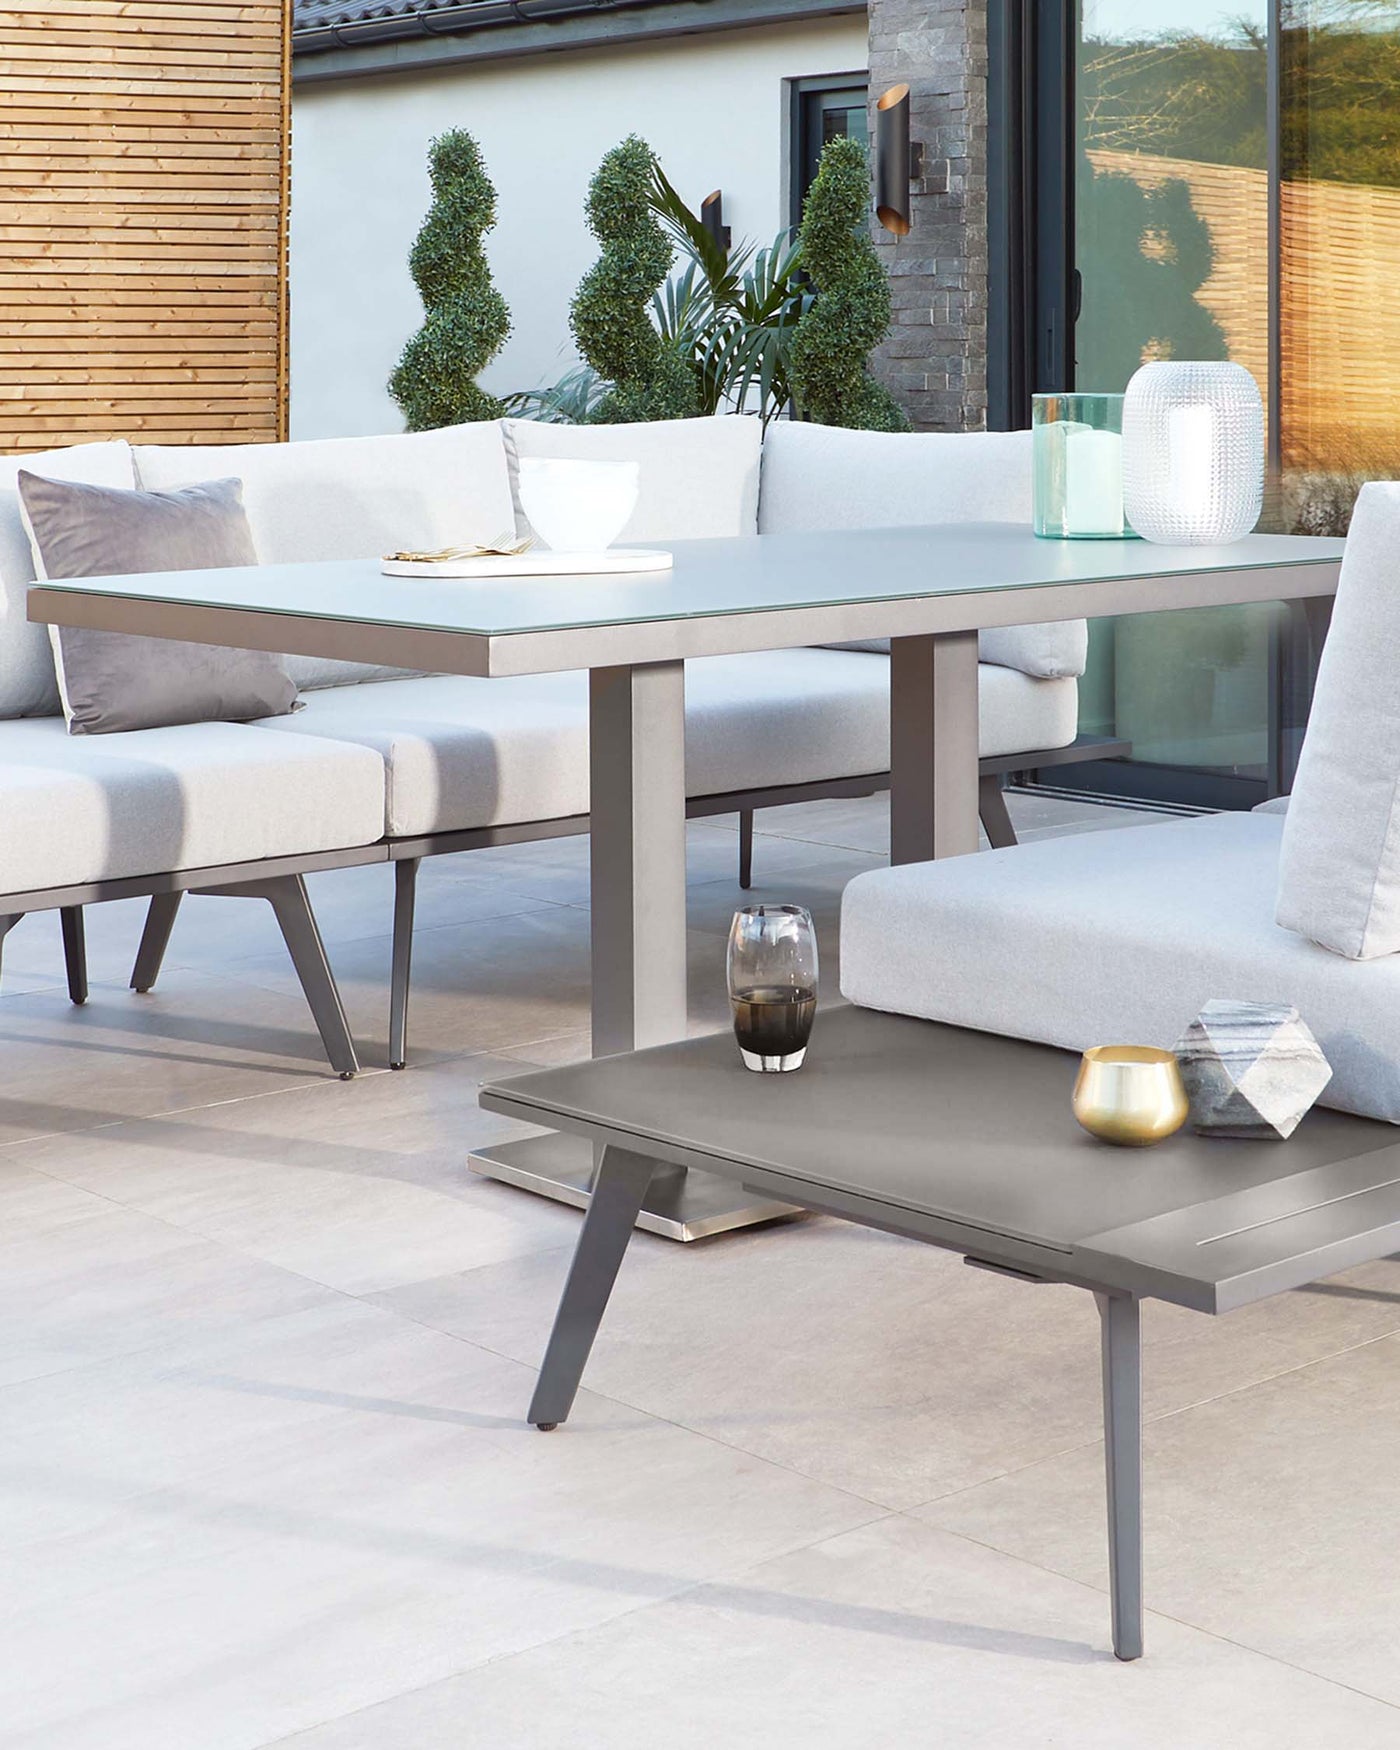 Outdoor modern furniture set featuring a sleek grey rectangular dining table and a matching corner sectional sofa with light grey cushions and plush back pillows. Accessories include a bowl, books, and decorative vases on the table, with a glass candle holder on the sofa-side table. The setup is complemented by topiary plants and a contemporary home facade in the background.